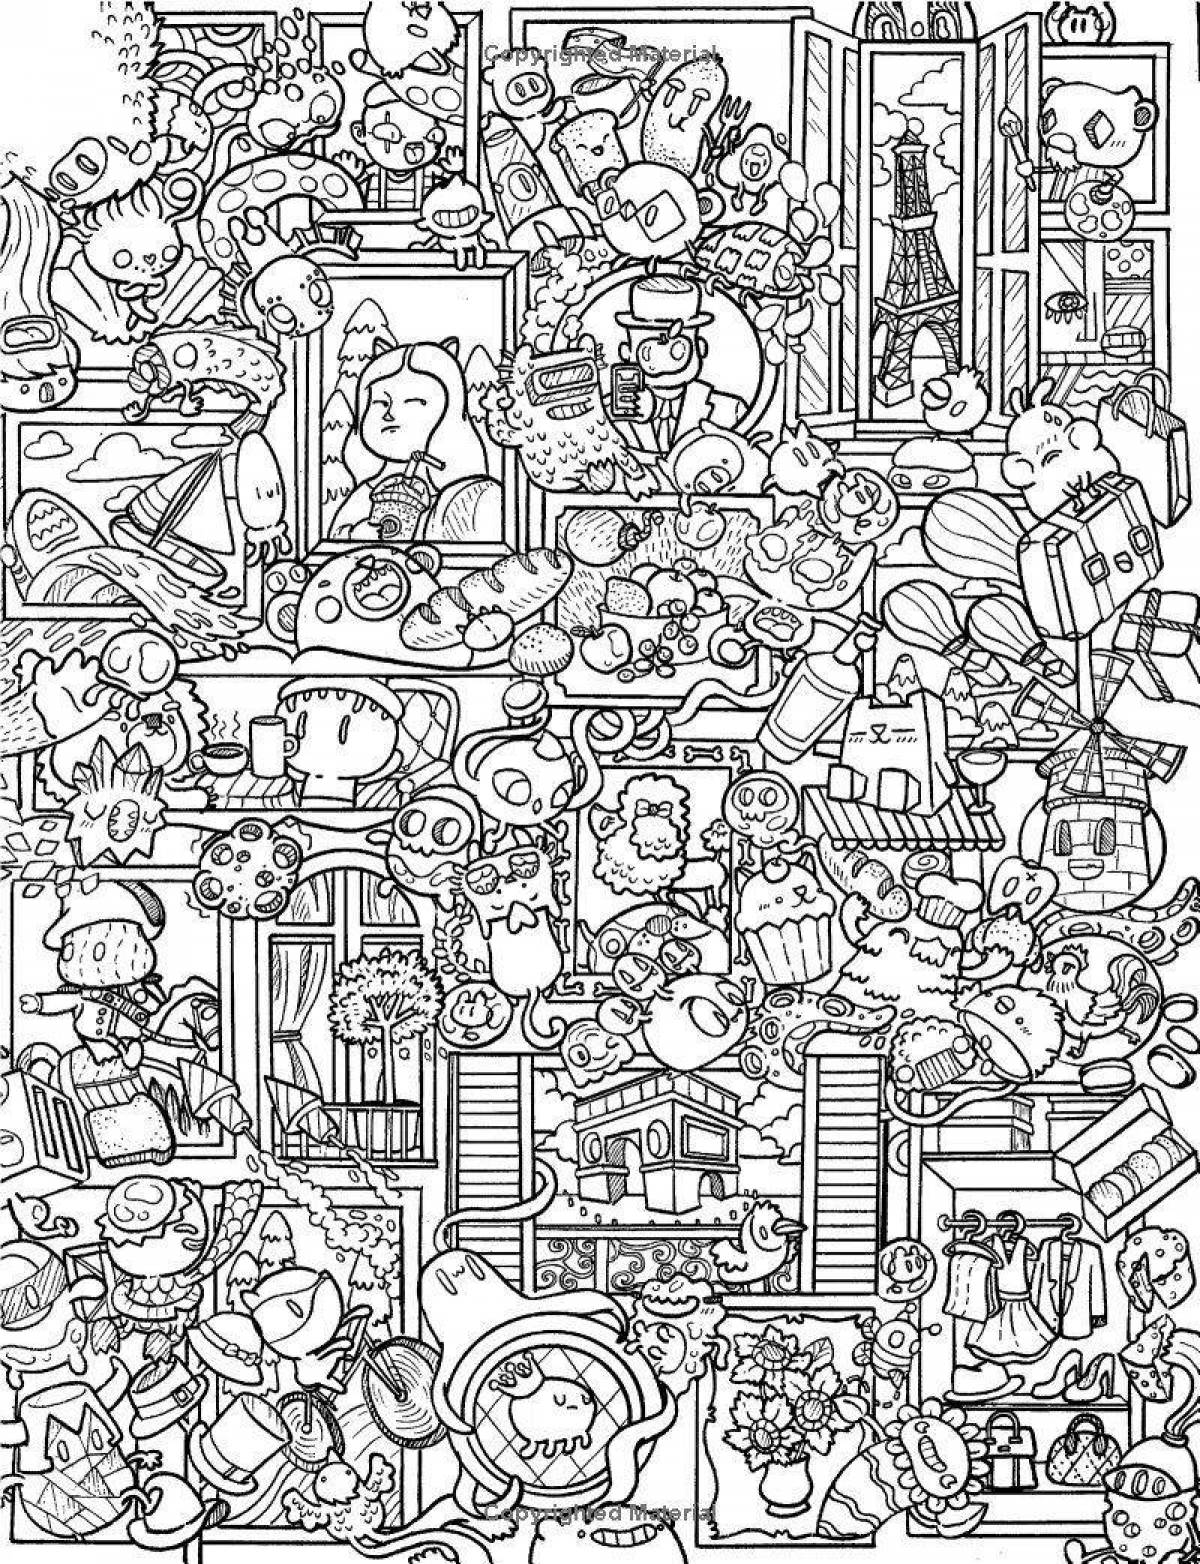 Fun coloring book with great details